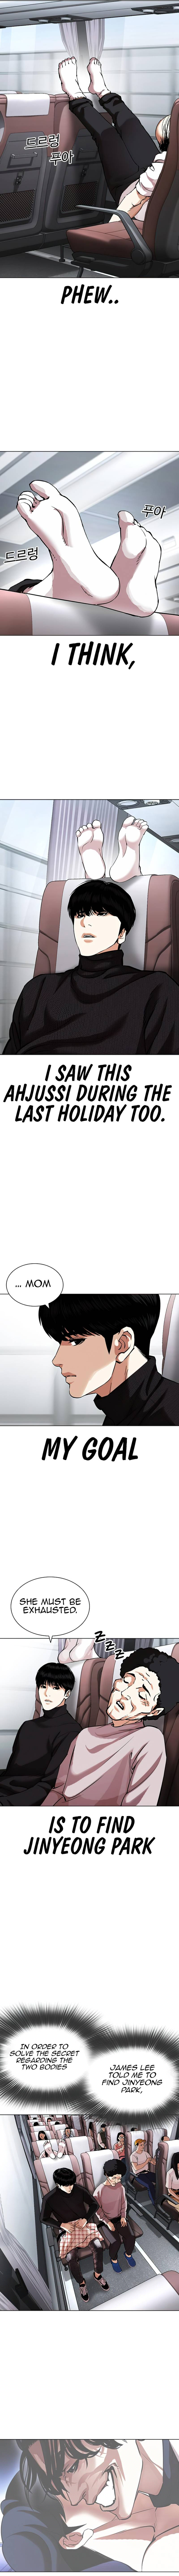 Lookism Chapter 433 image 13